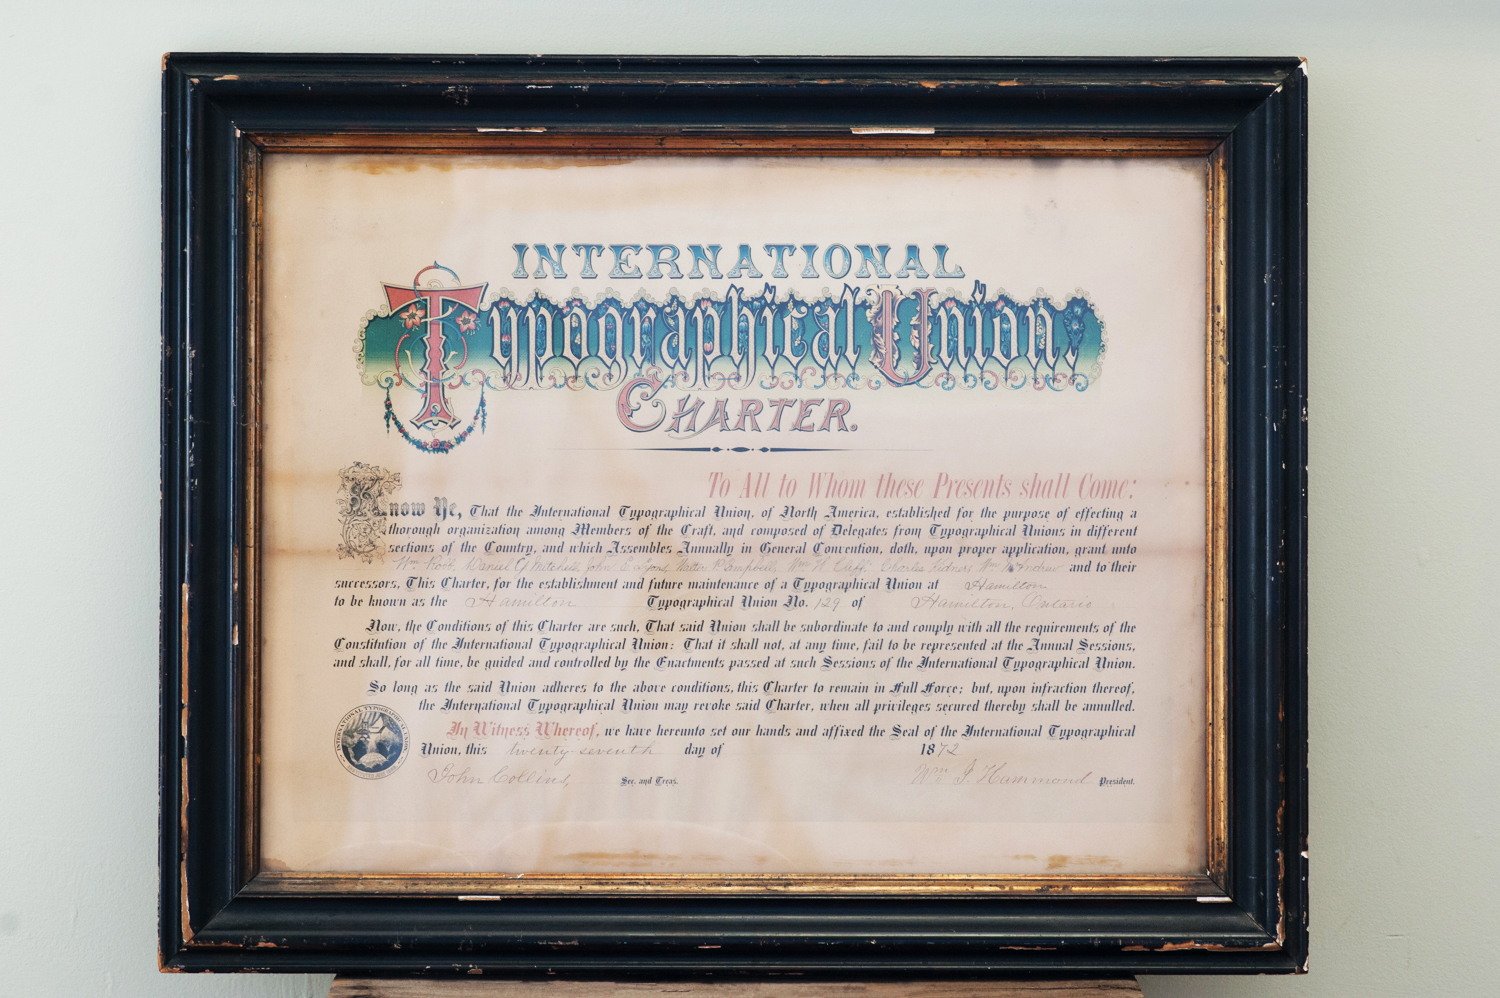 A photo of the International Typographical Union Charter from 1872. The signed paper charter uses historic calligraphy and has been preserved with glass and a wooden frame.